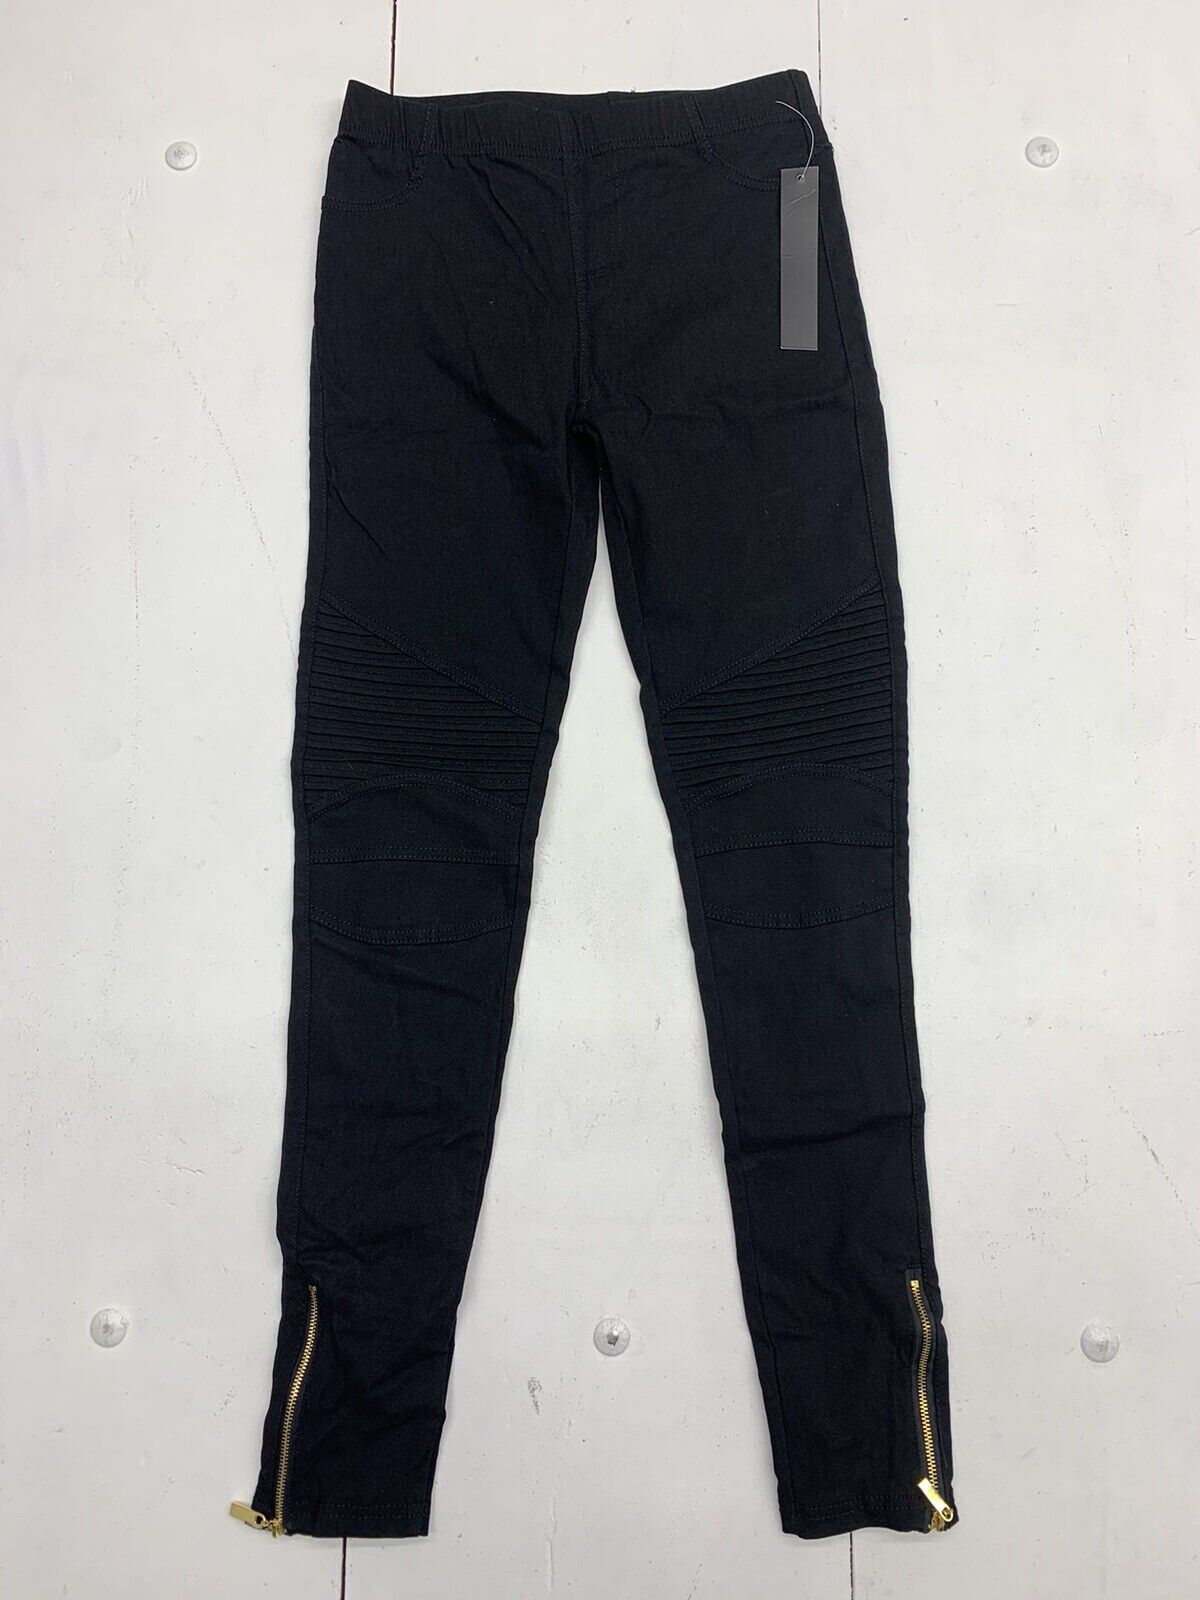 New Womens Joy Lab Black Relaxed Fit Moisture Wicking Pants Size